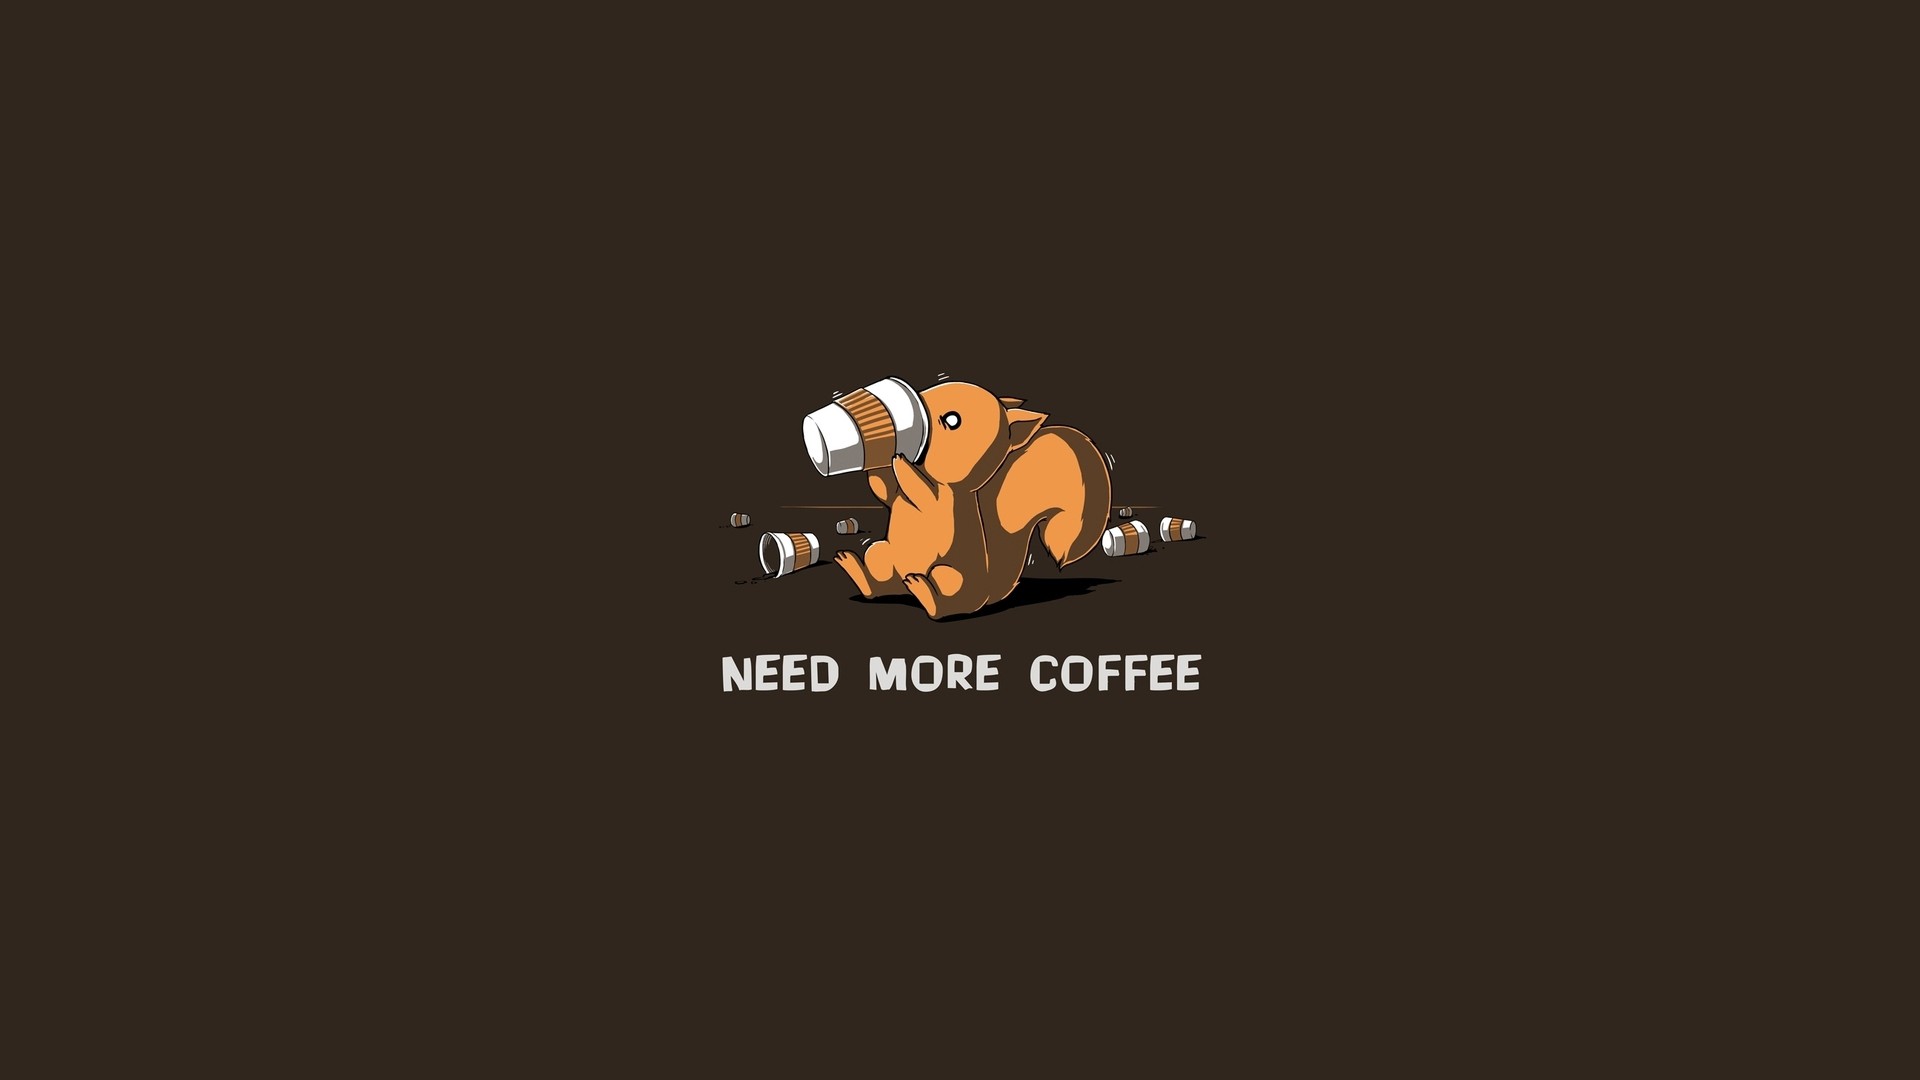 More Coffee Wallpapers Squirrel Need More Coffee Myspace Backgrounds